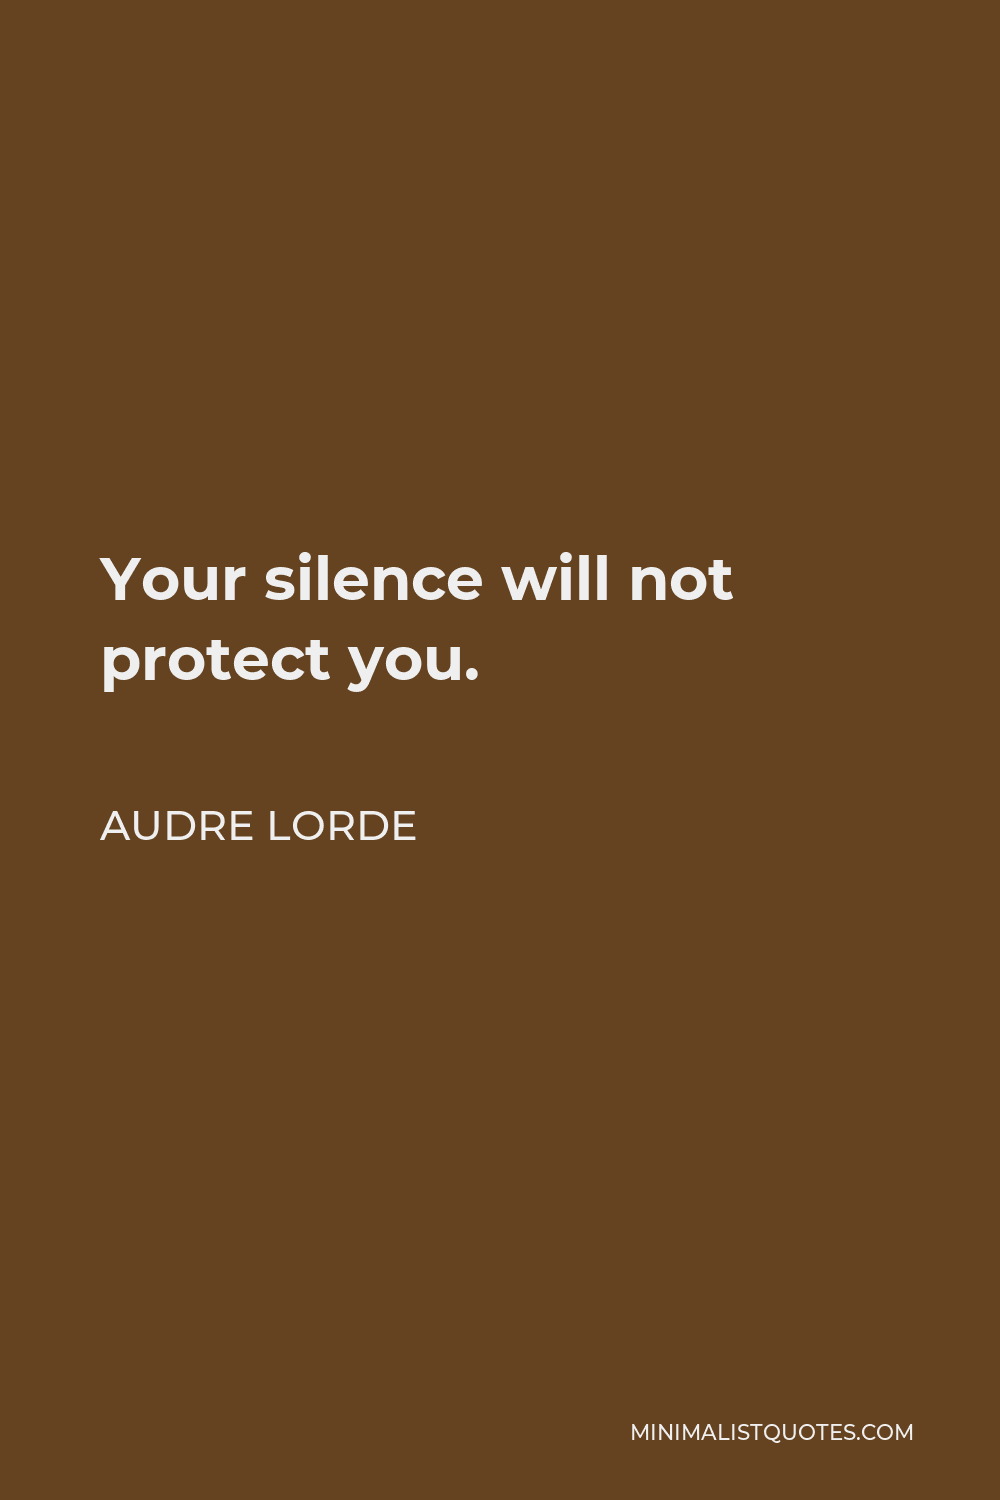 Audre Lorde Quote - Your silence will not protect you.